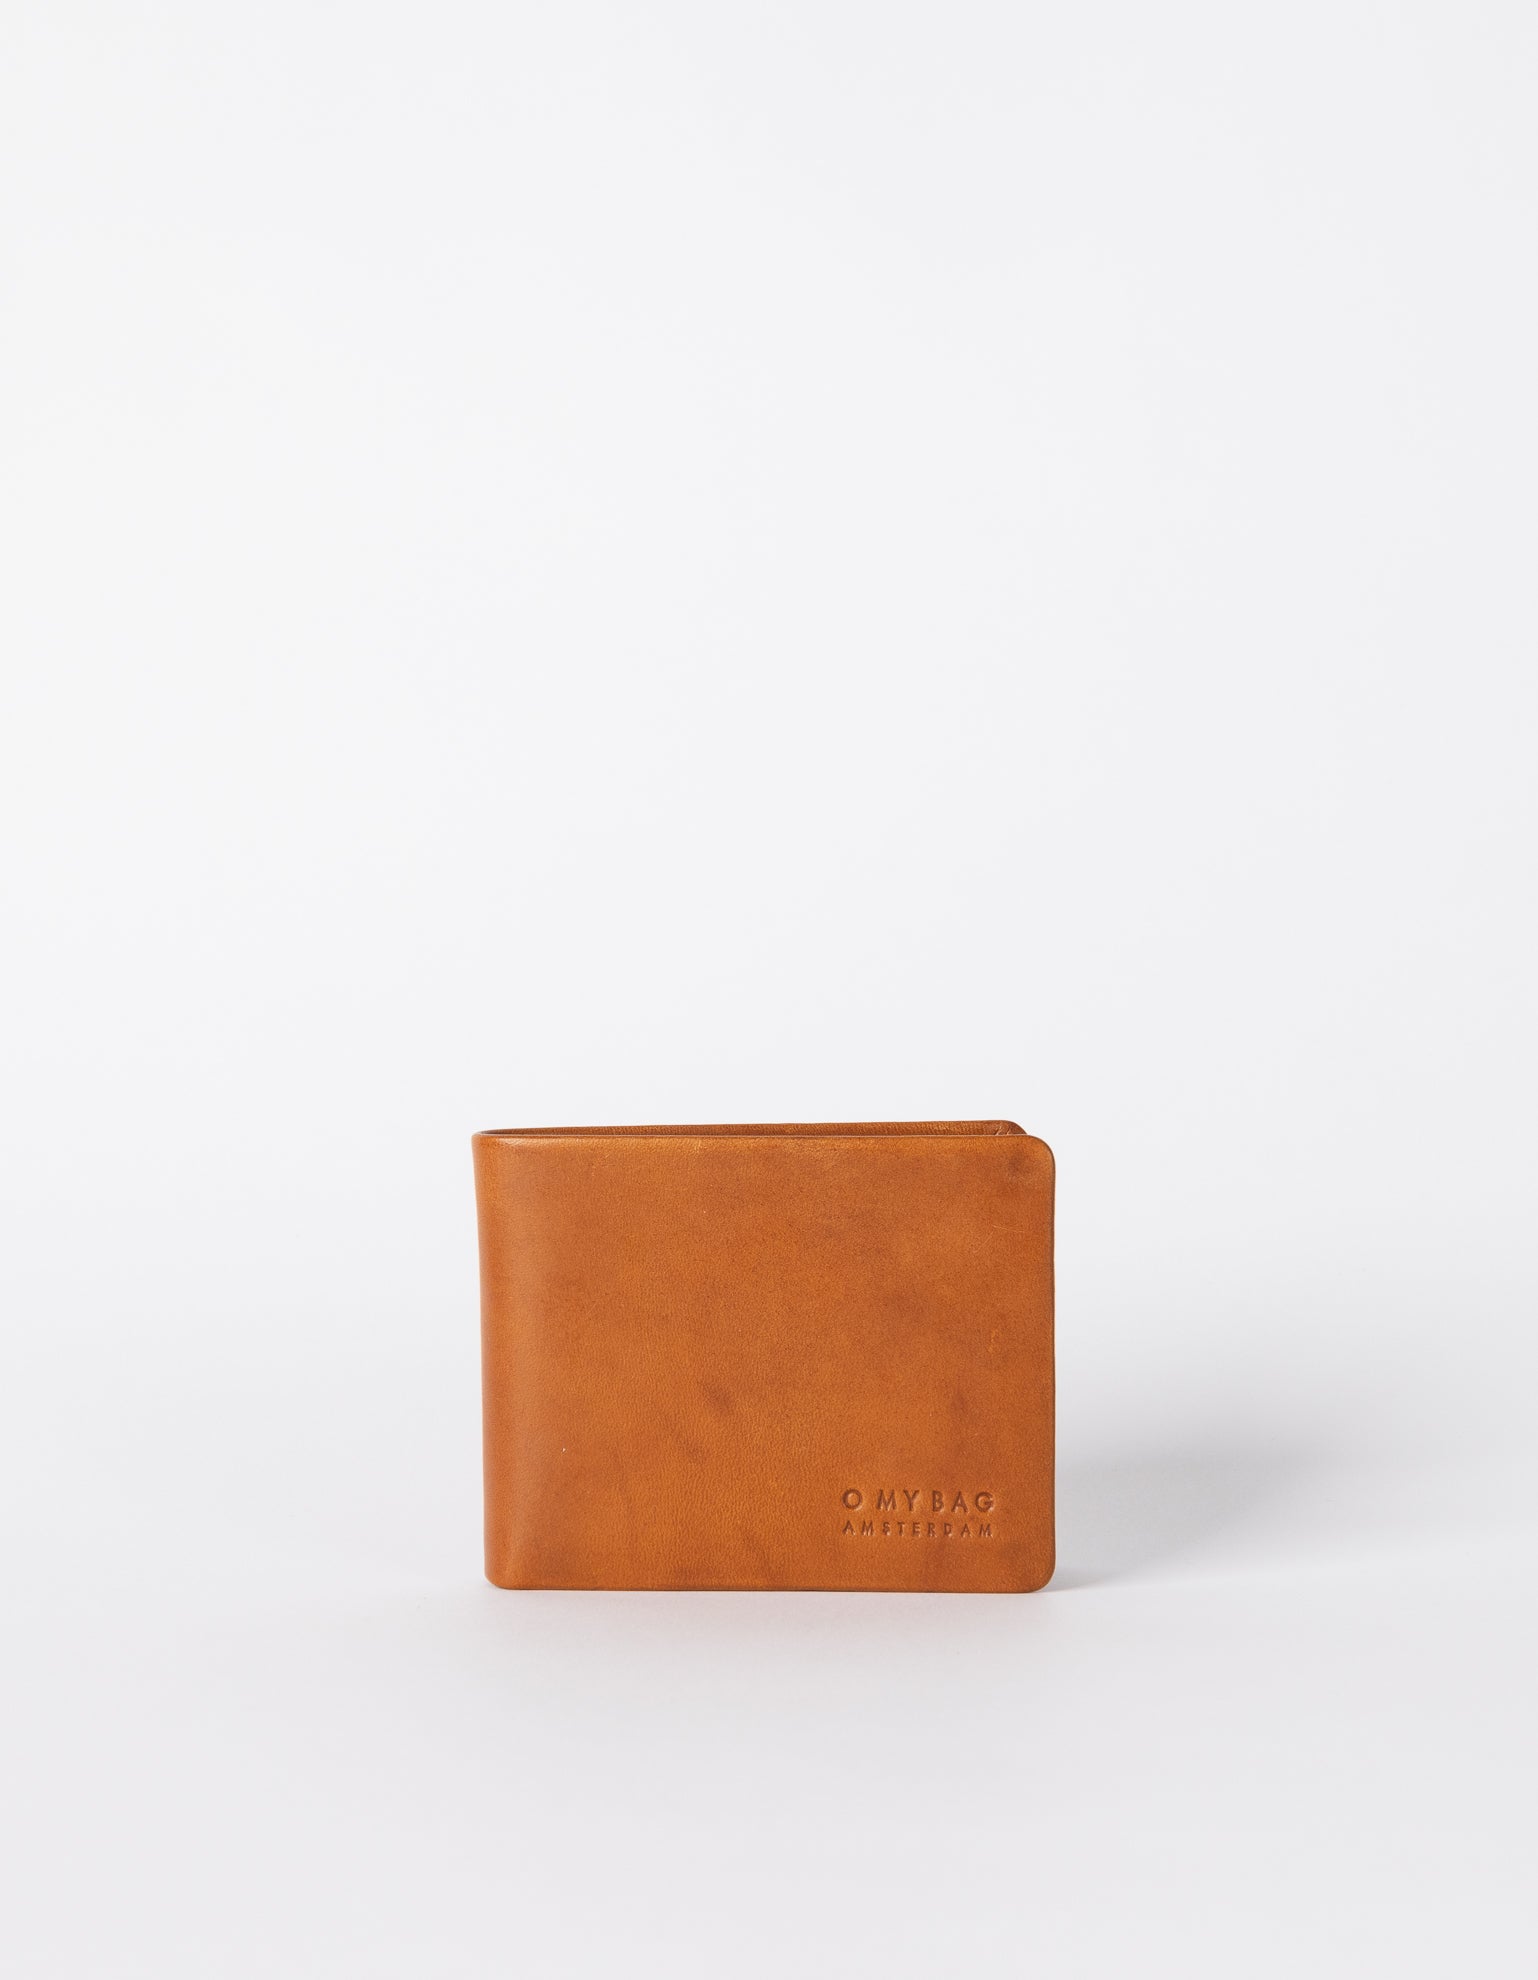 Cognac Leather fold over wallet. Square shape. Front product image.